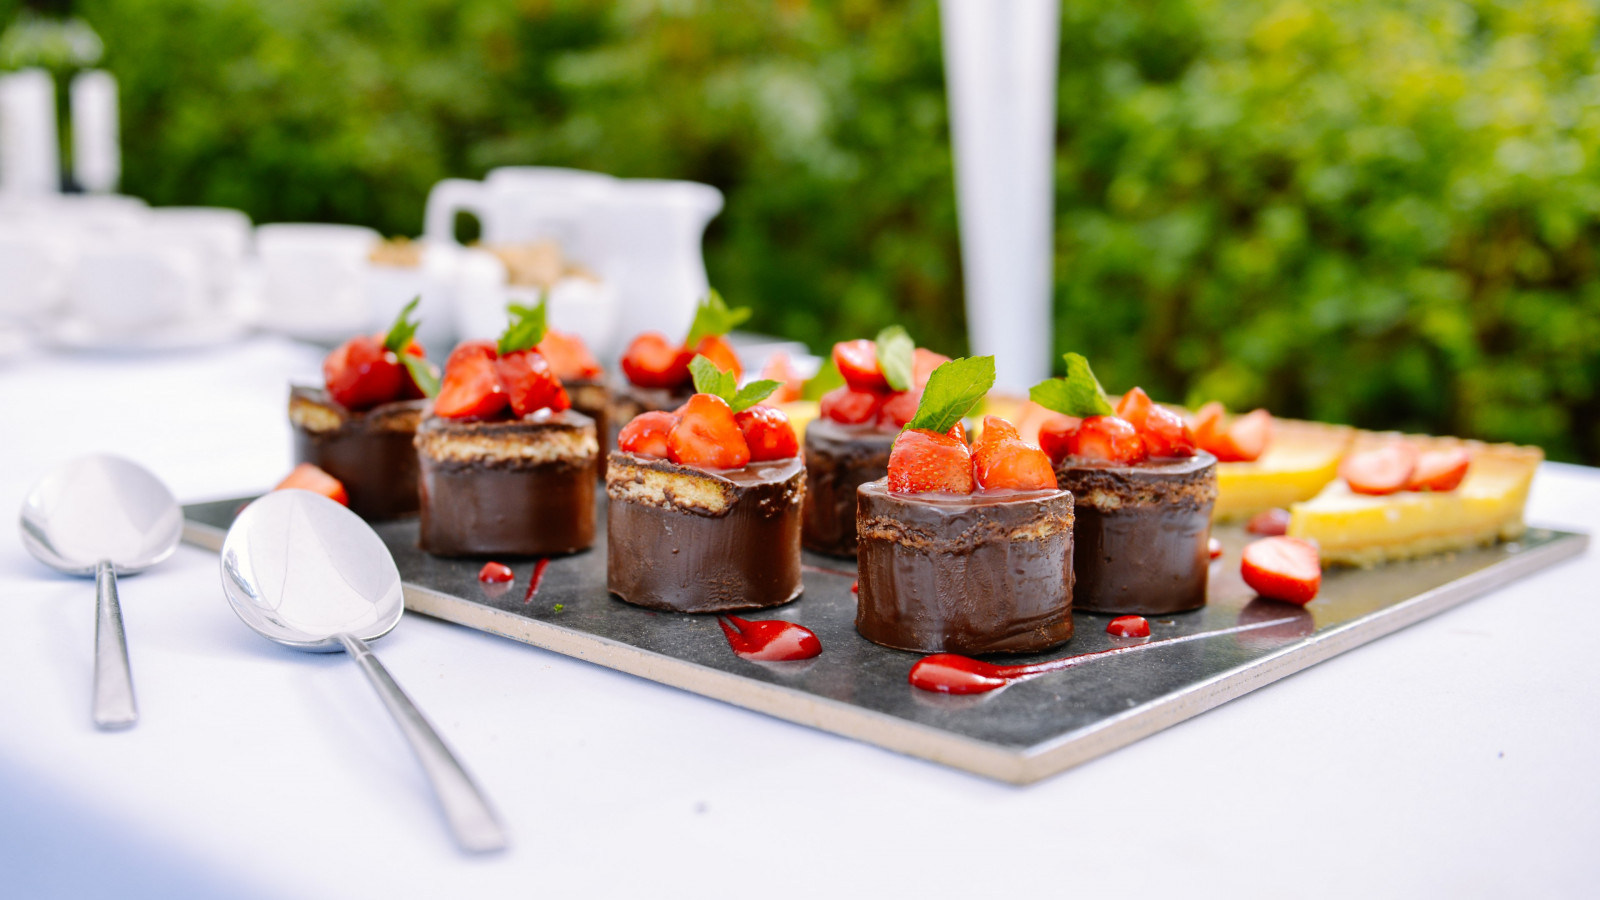 Chocolate cakes with strawberries wallpaper 1600x900